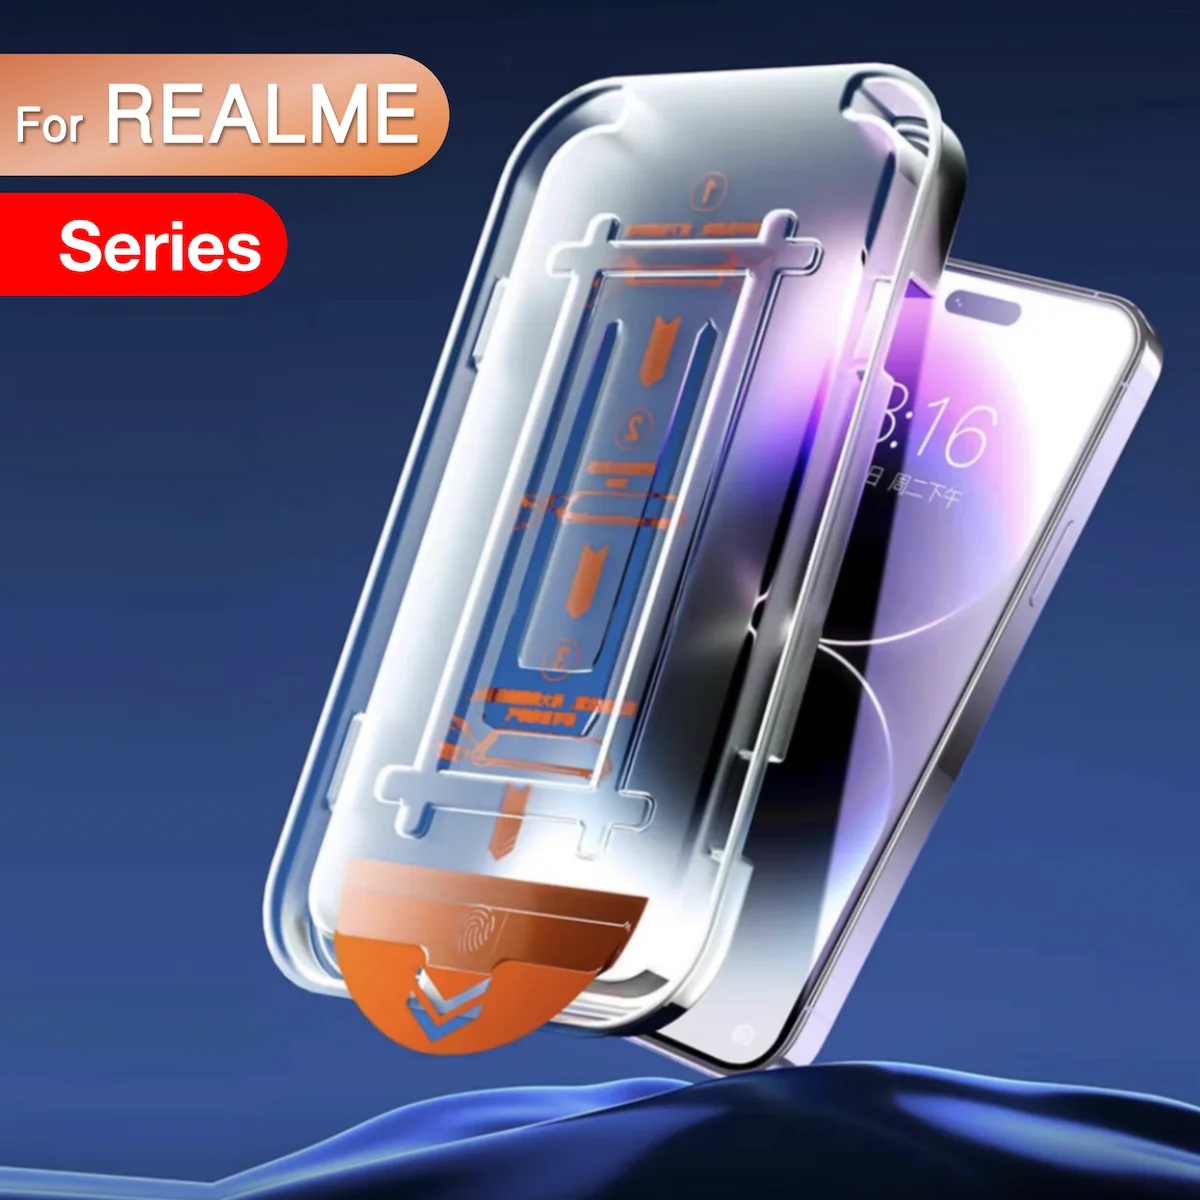 

For REALME 6 7 8 9 10 Pro X X2 X7 Screen Protector ACE Q5 Q2 Q3 GT Noe 2 2t 3 Toughened Glass Easy Install Auto-Dust Removal Kit